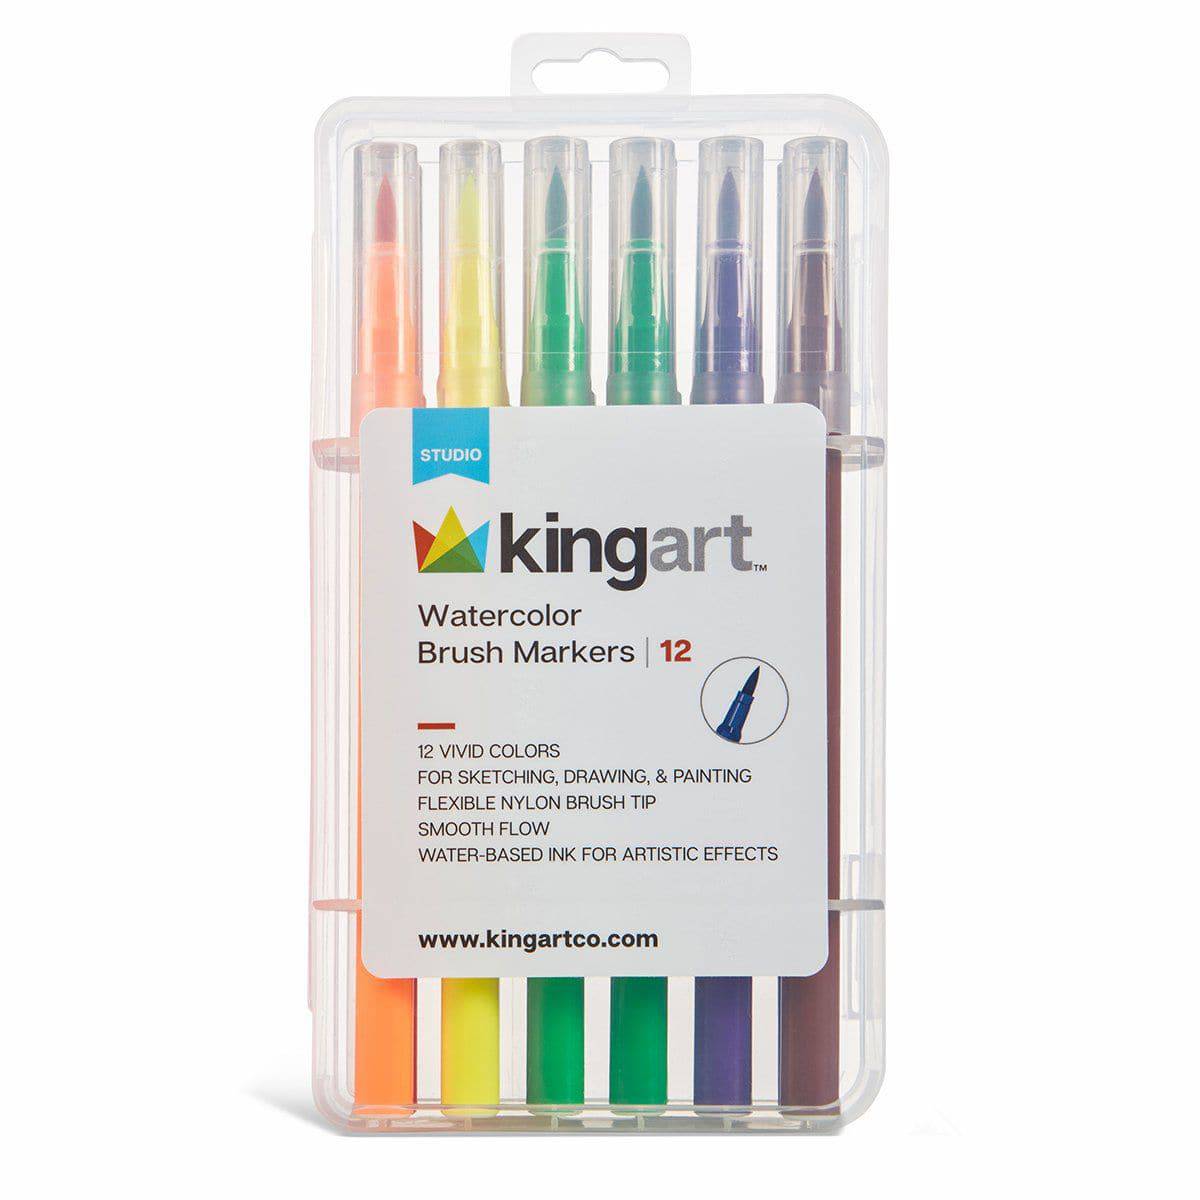 KINGART PRO Coloring Brush Pen Watercolor Markers, in 48 Vivid Colors with  Blendable Ink for Fine, Medium, or Bold Brush Strokes